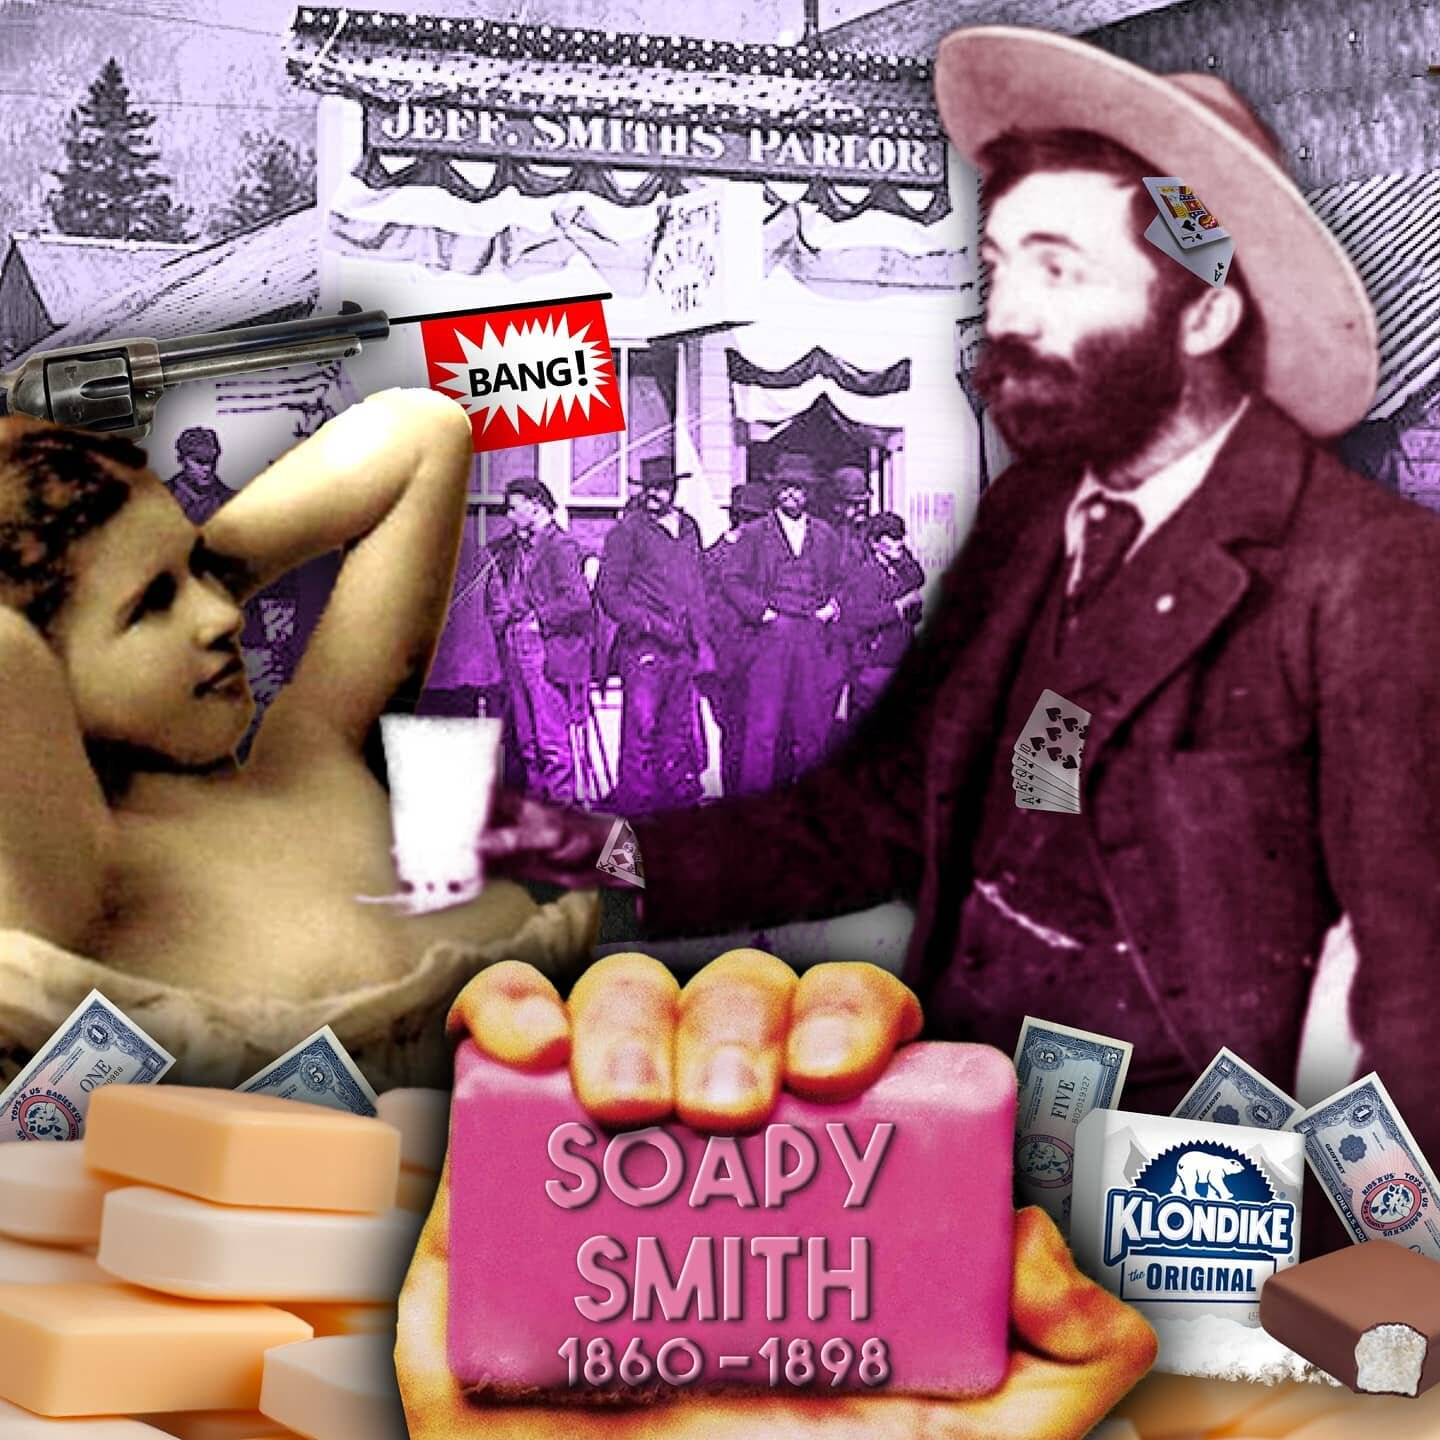 Soapy Smith was the Wild West's freshest con-artist! With a soap kinder egg in one hand, some rigged walnuts in the other and a deck of cards rolled into his foreskin he swindled his way from Texas to the Klondike. 

iTunes
► https://t.co/1iTEMuzKzl
